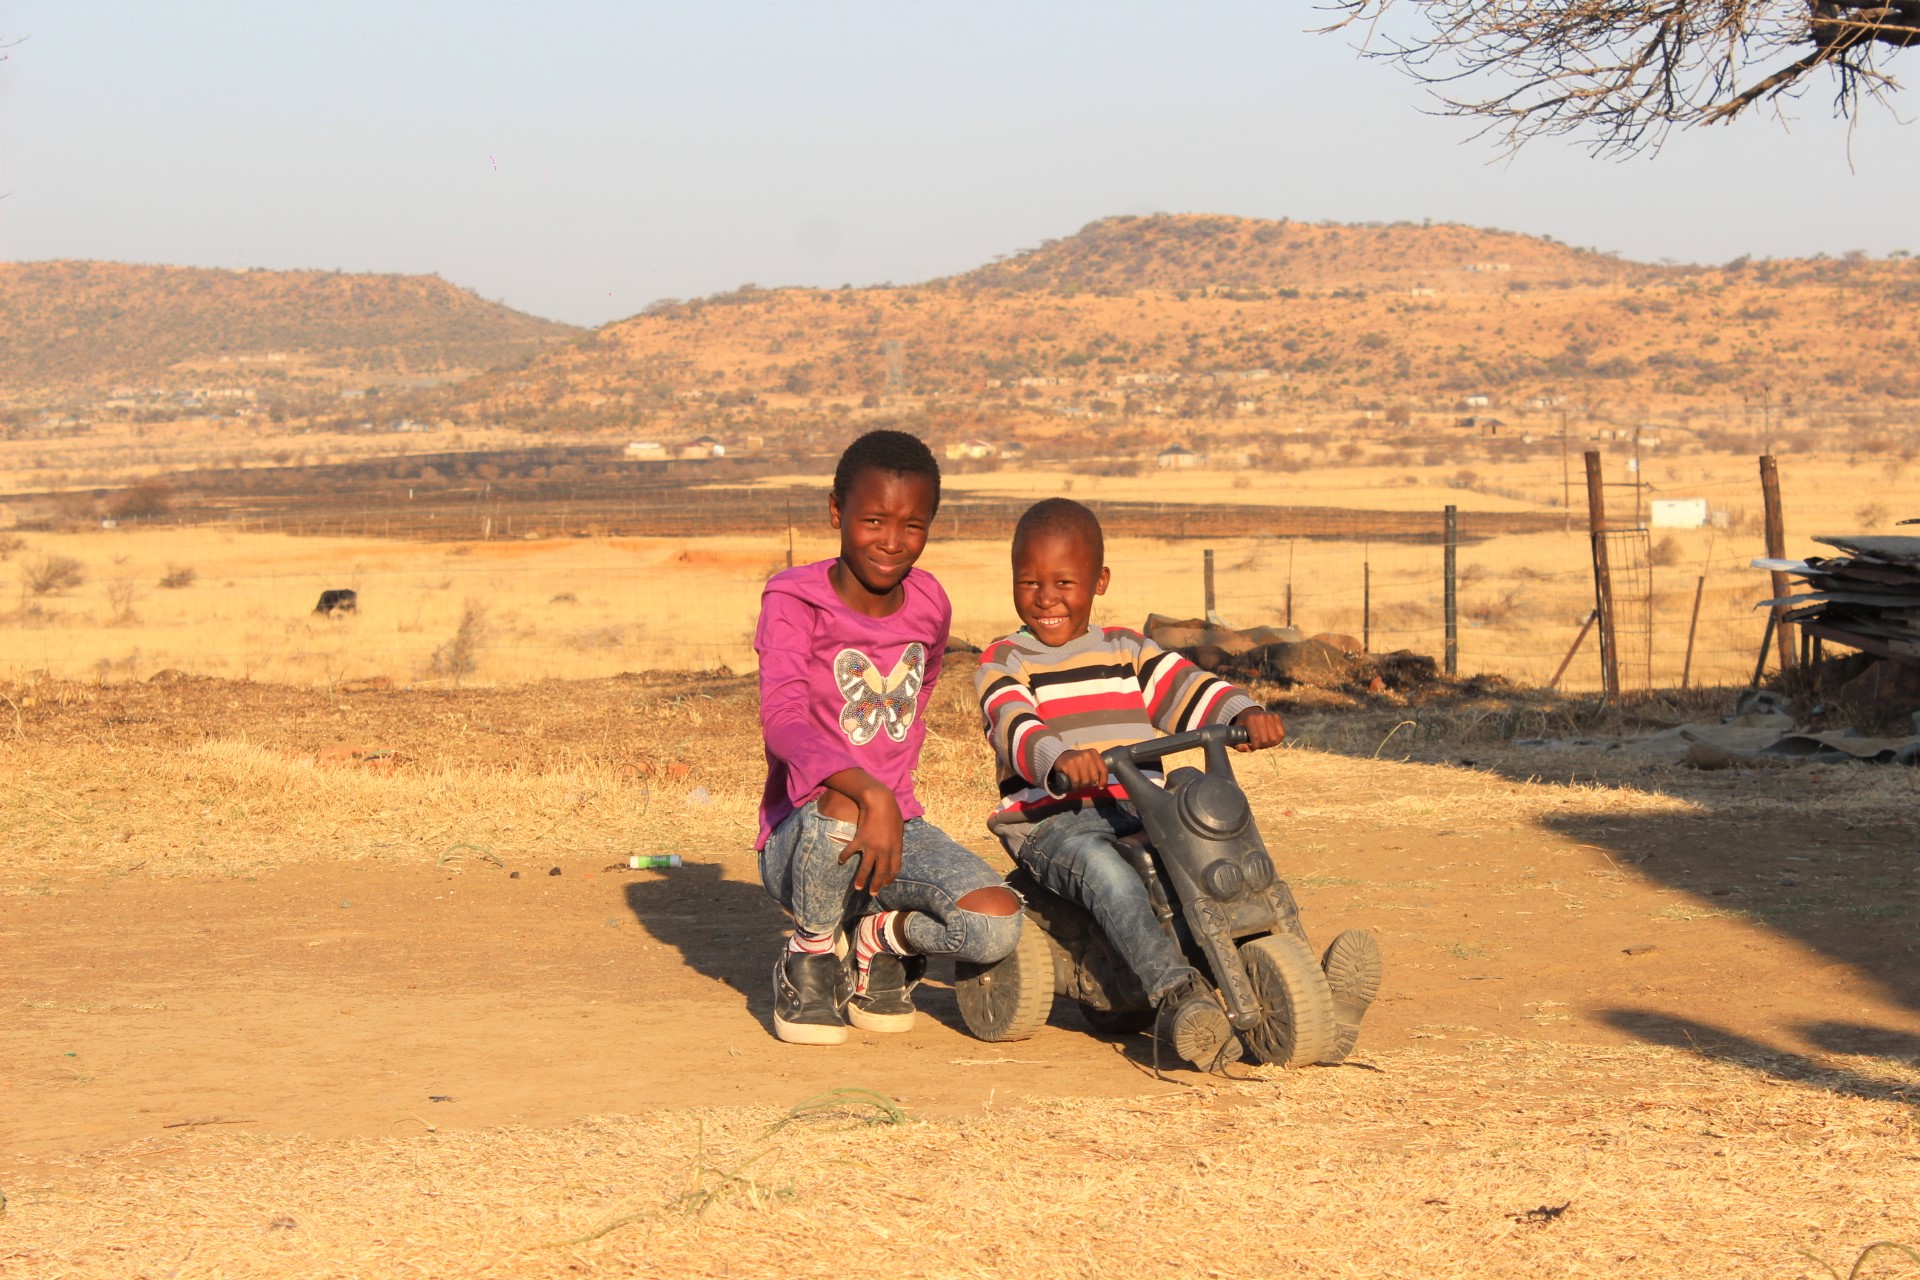 Children, Amahle and Siyanda, playing in the yard